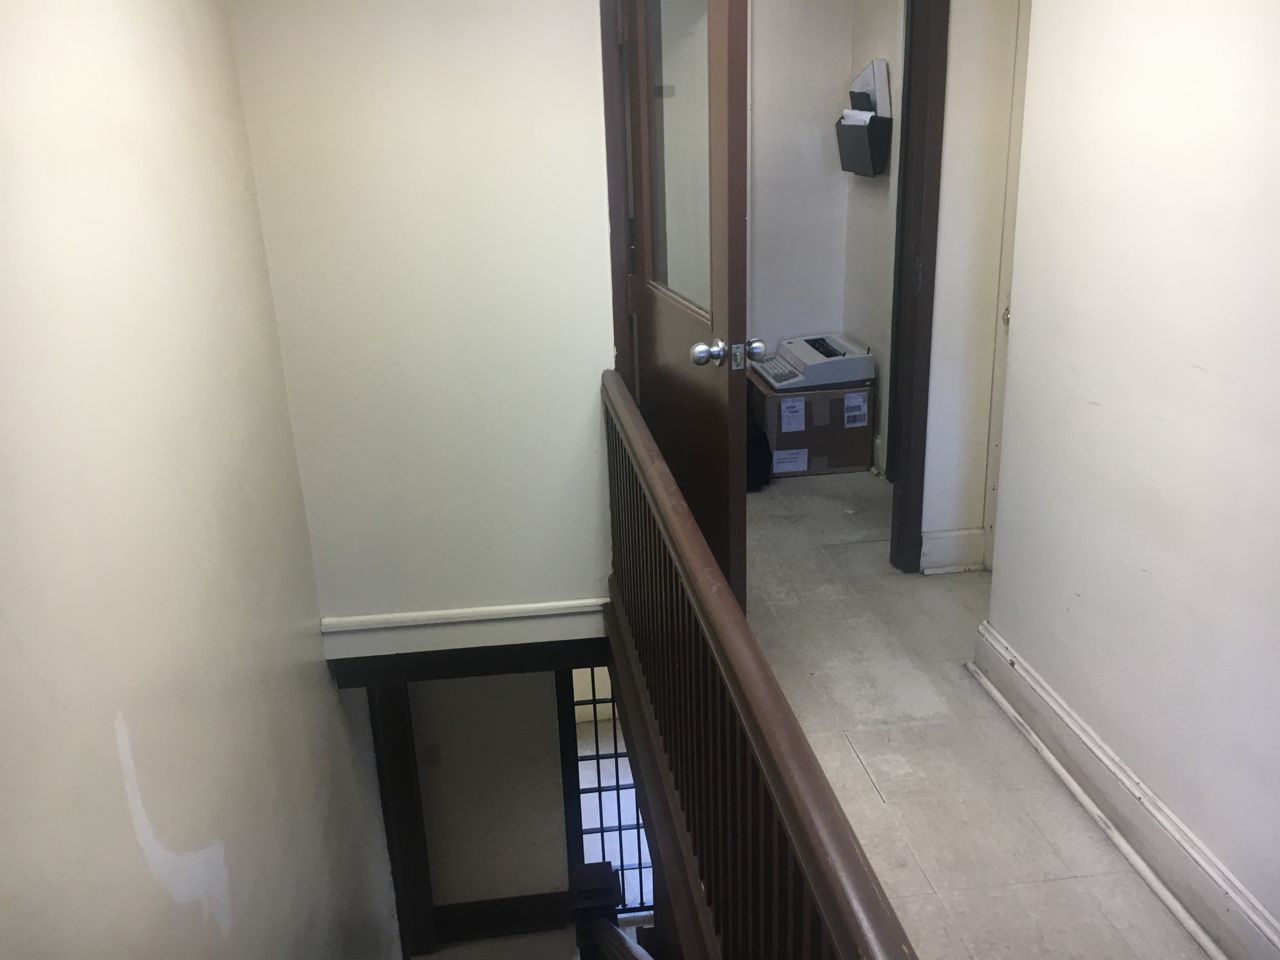 A stairway inside the Sullivan County Sheriff's Patrol Office